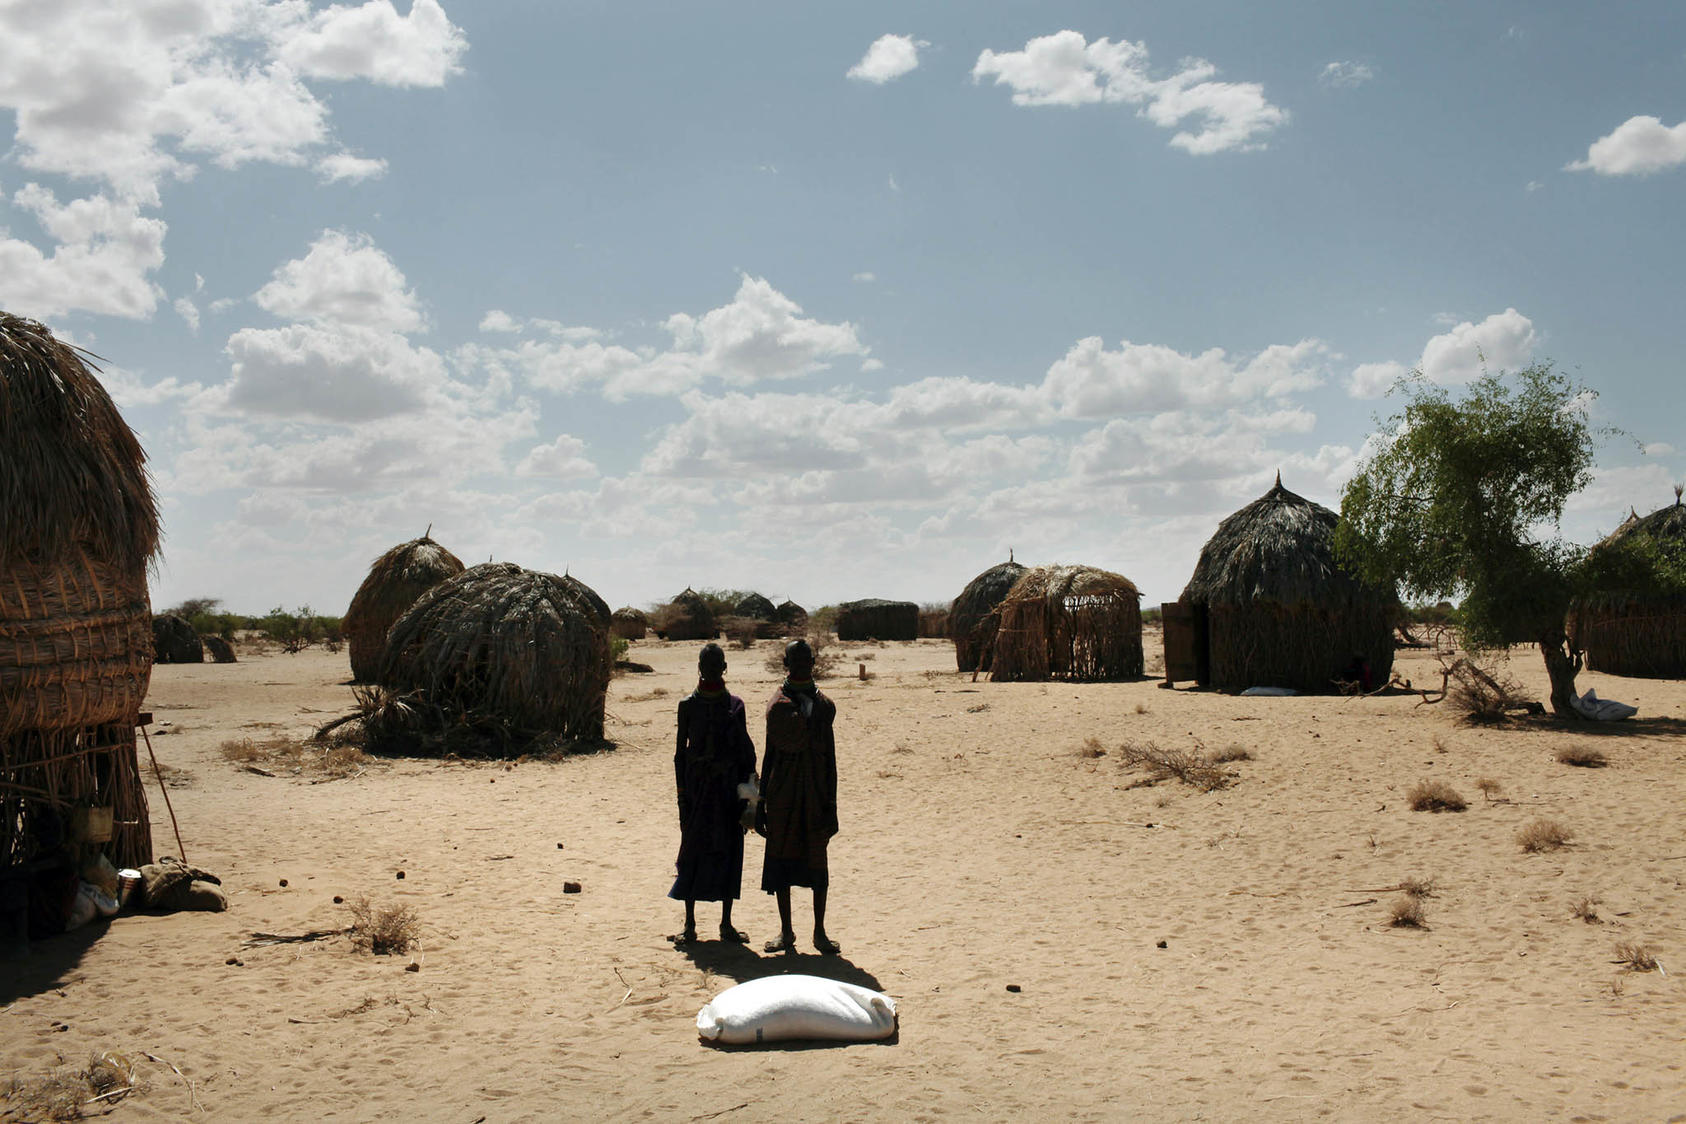 Villagers with bags of food in Lokori, Kenya, in August 2009. A devastating drought spawned an ethnic conflict in the hinterland as pastoralist communities fought over the last remaining pieces of fertile grazing land. (Jehad Nga/The New York Times)